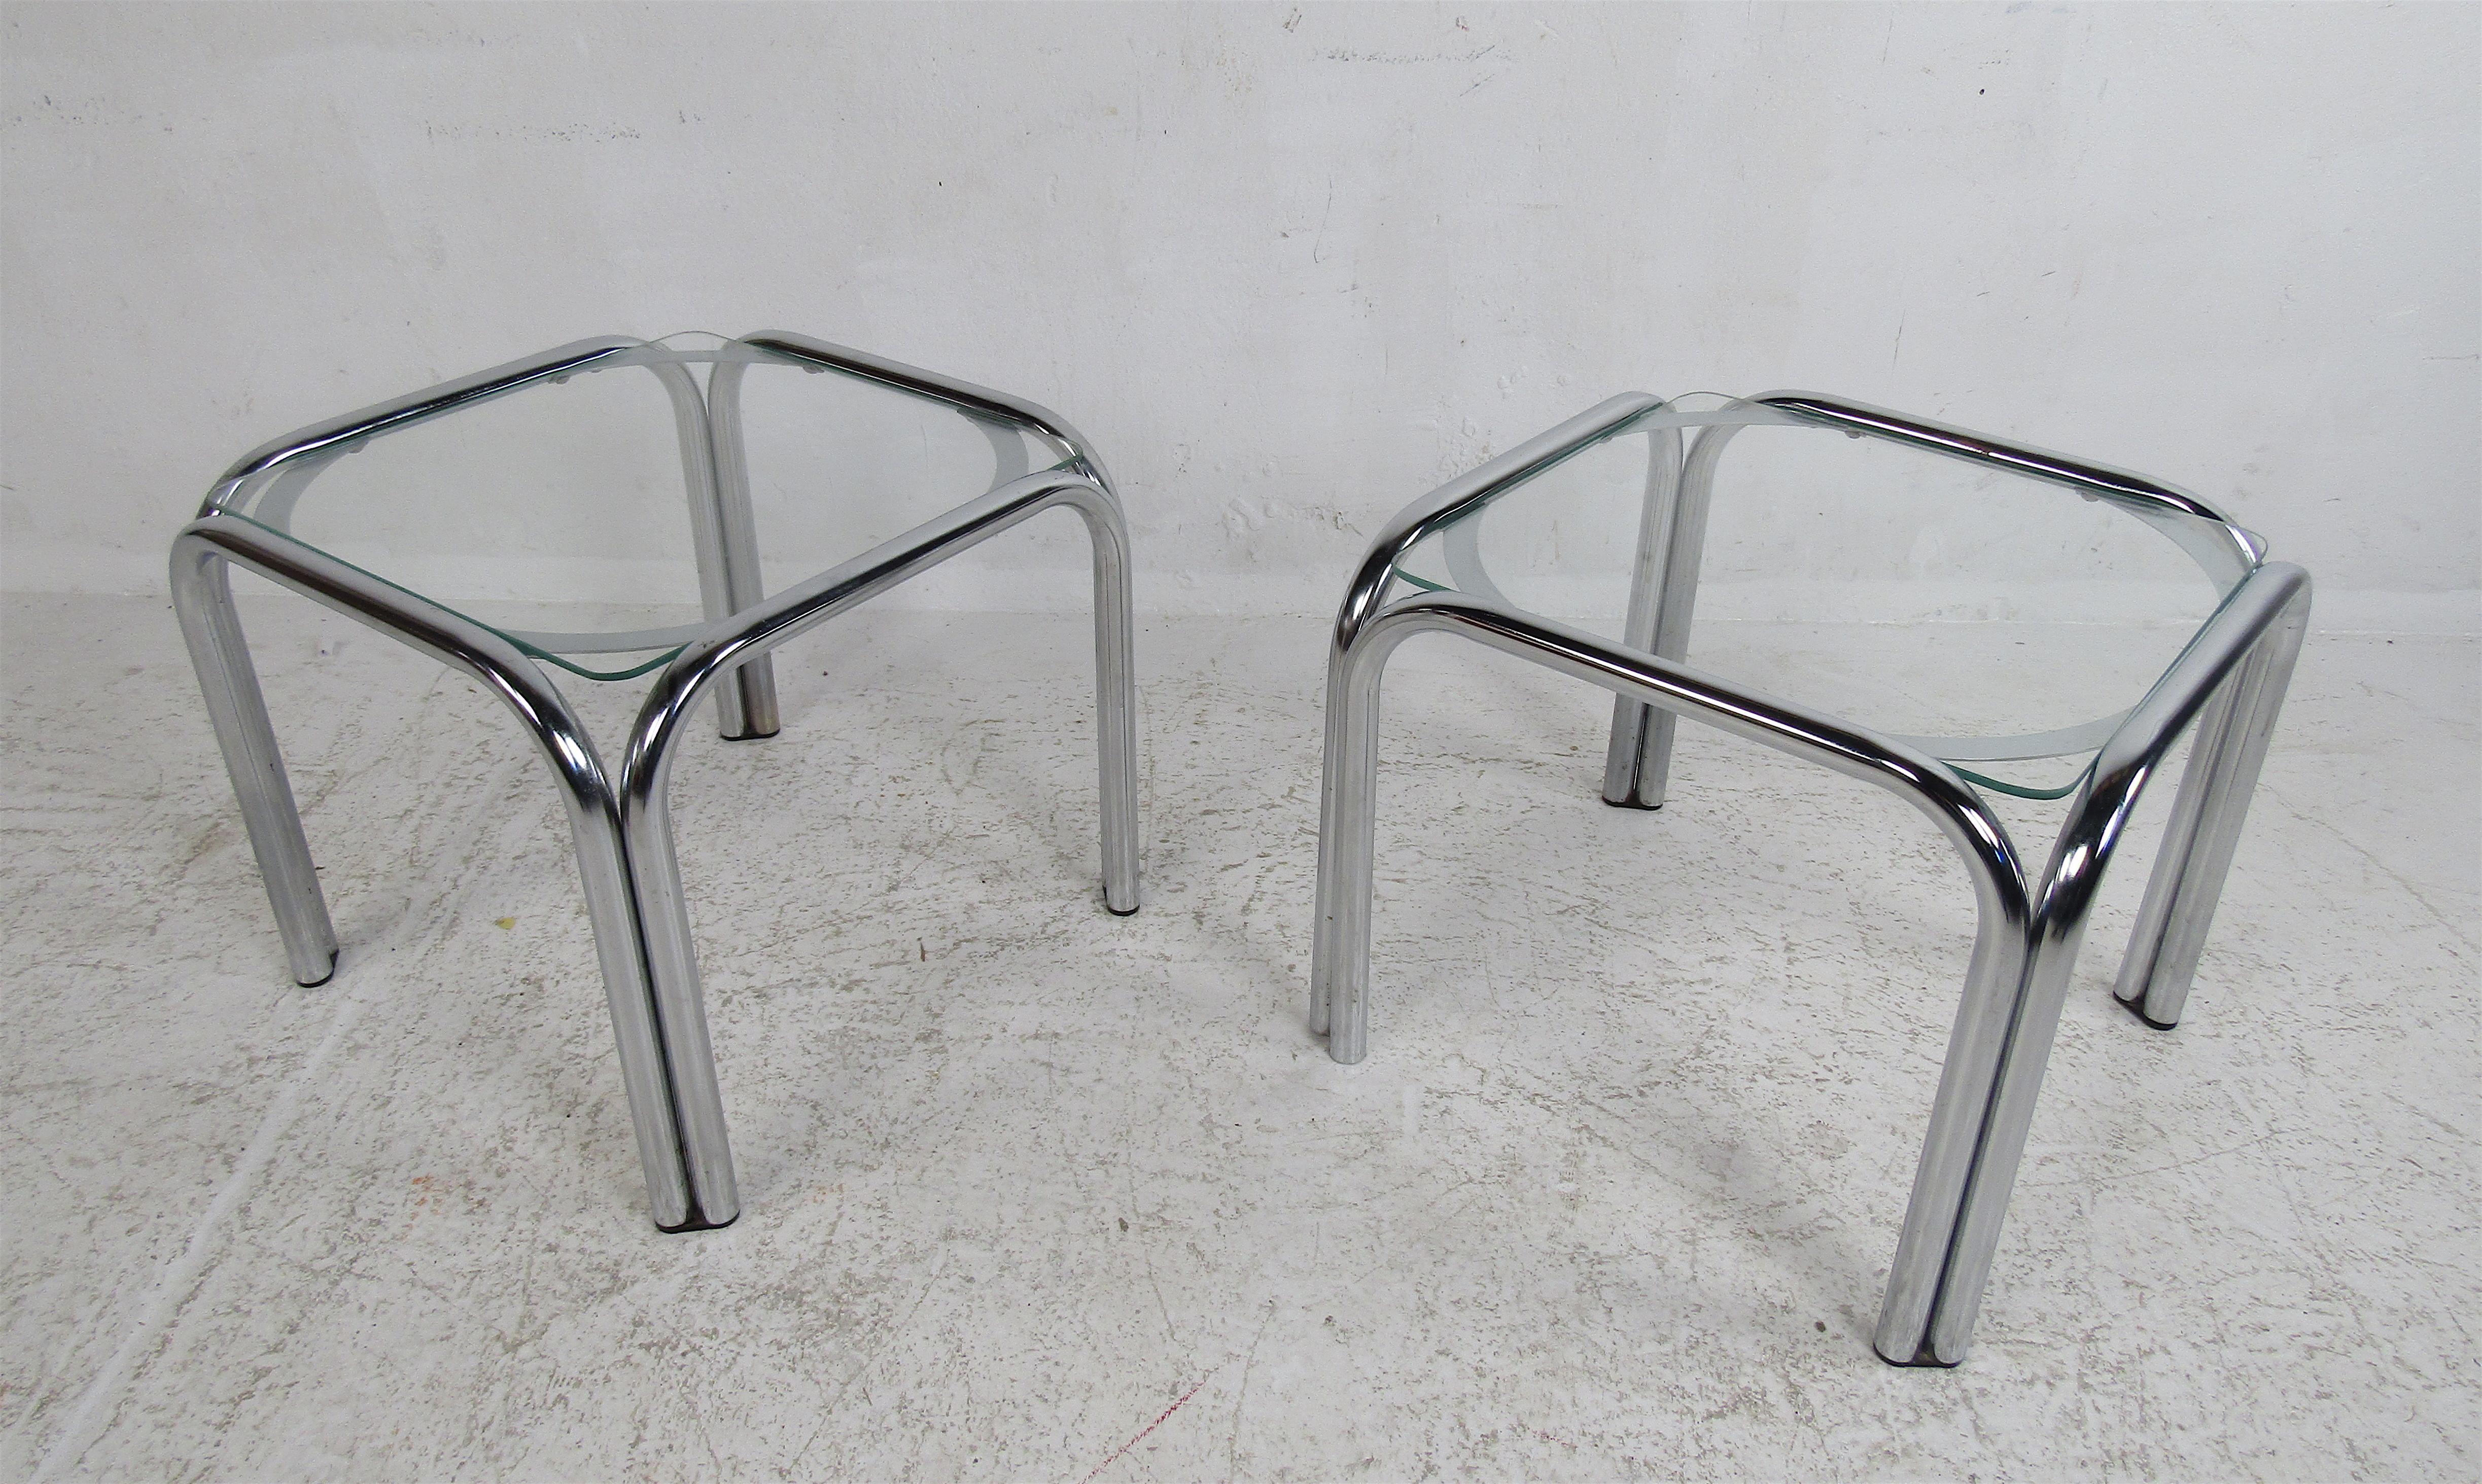 The unique tubular chrome frame supports a glass top. A wild Italian modern design with a glass top that appears to be floating when seen from certain angles. A sharp-looking pair of tables that are sure to set the tone in any room. Sleek and